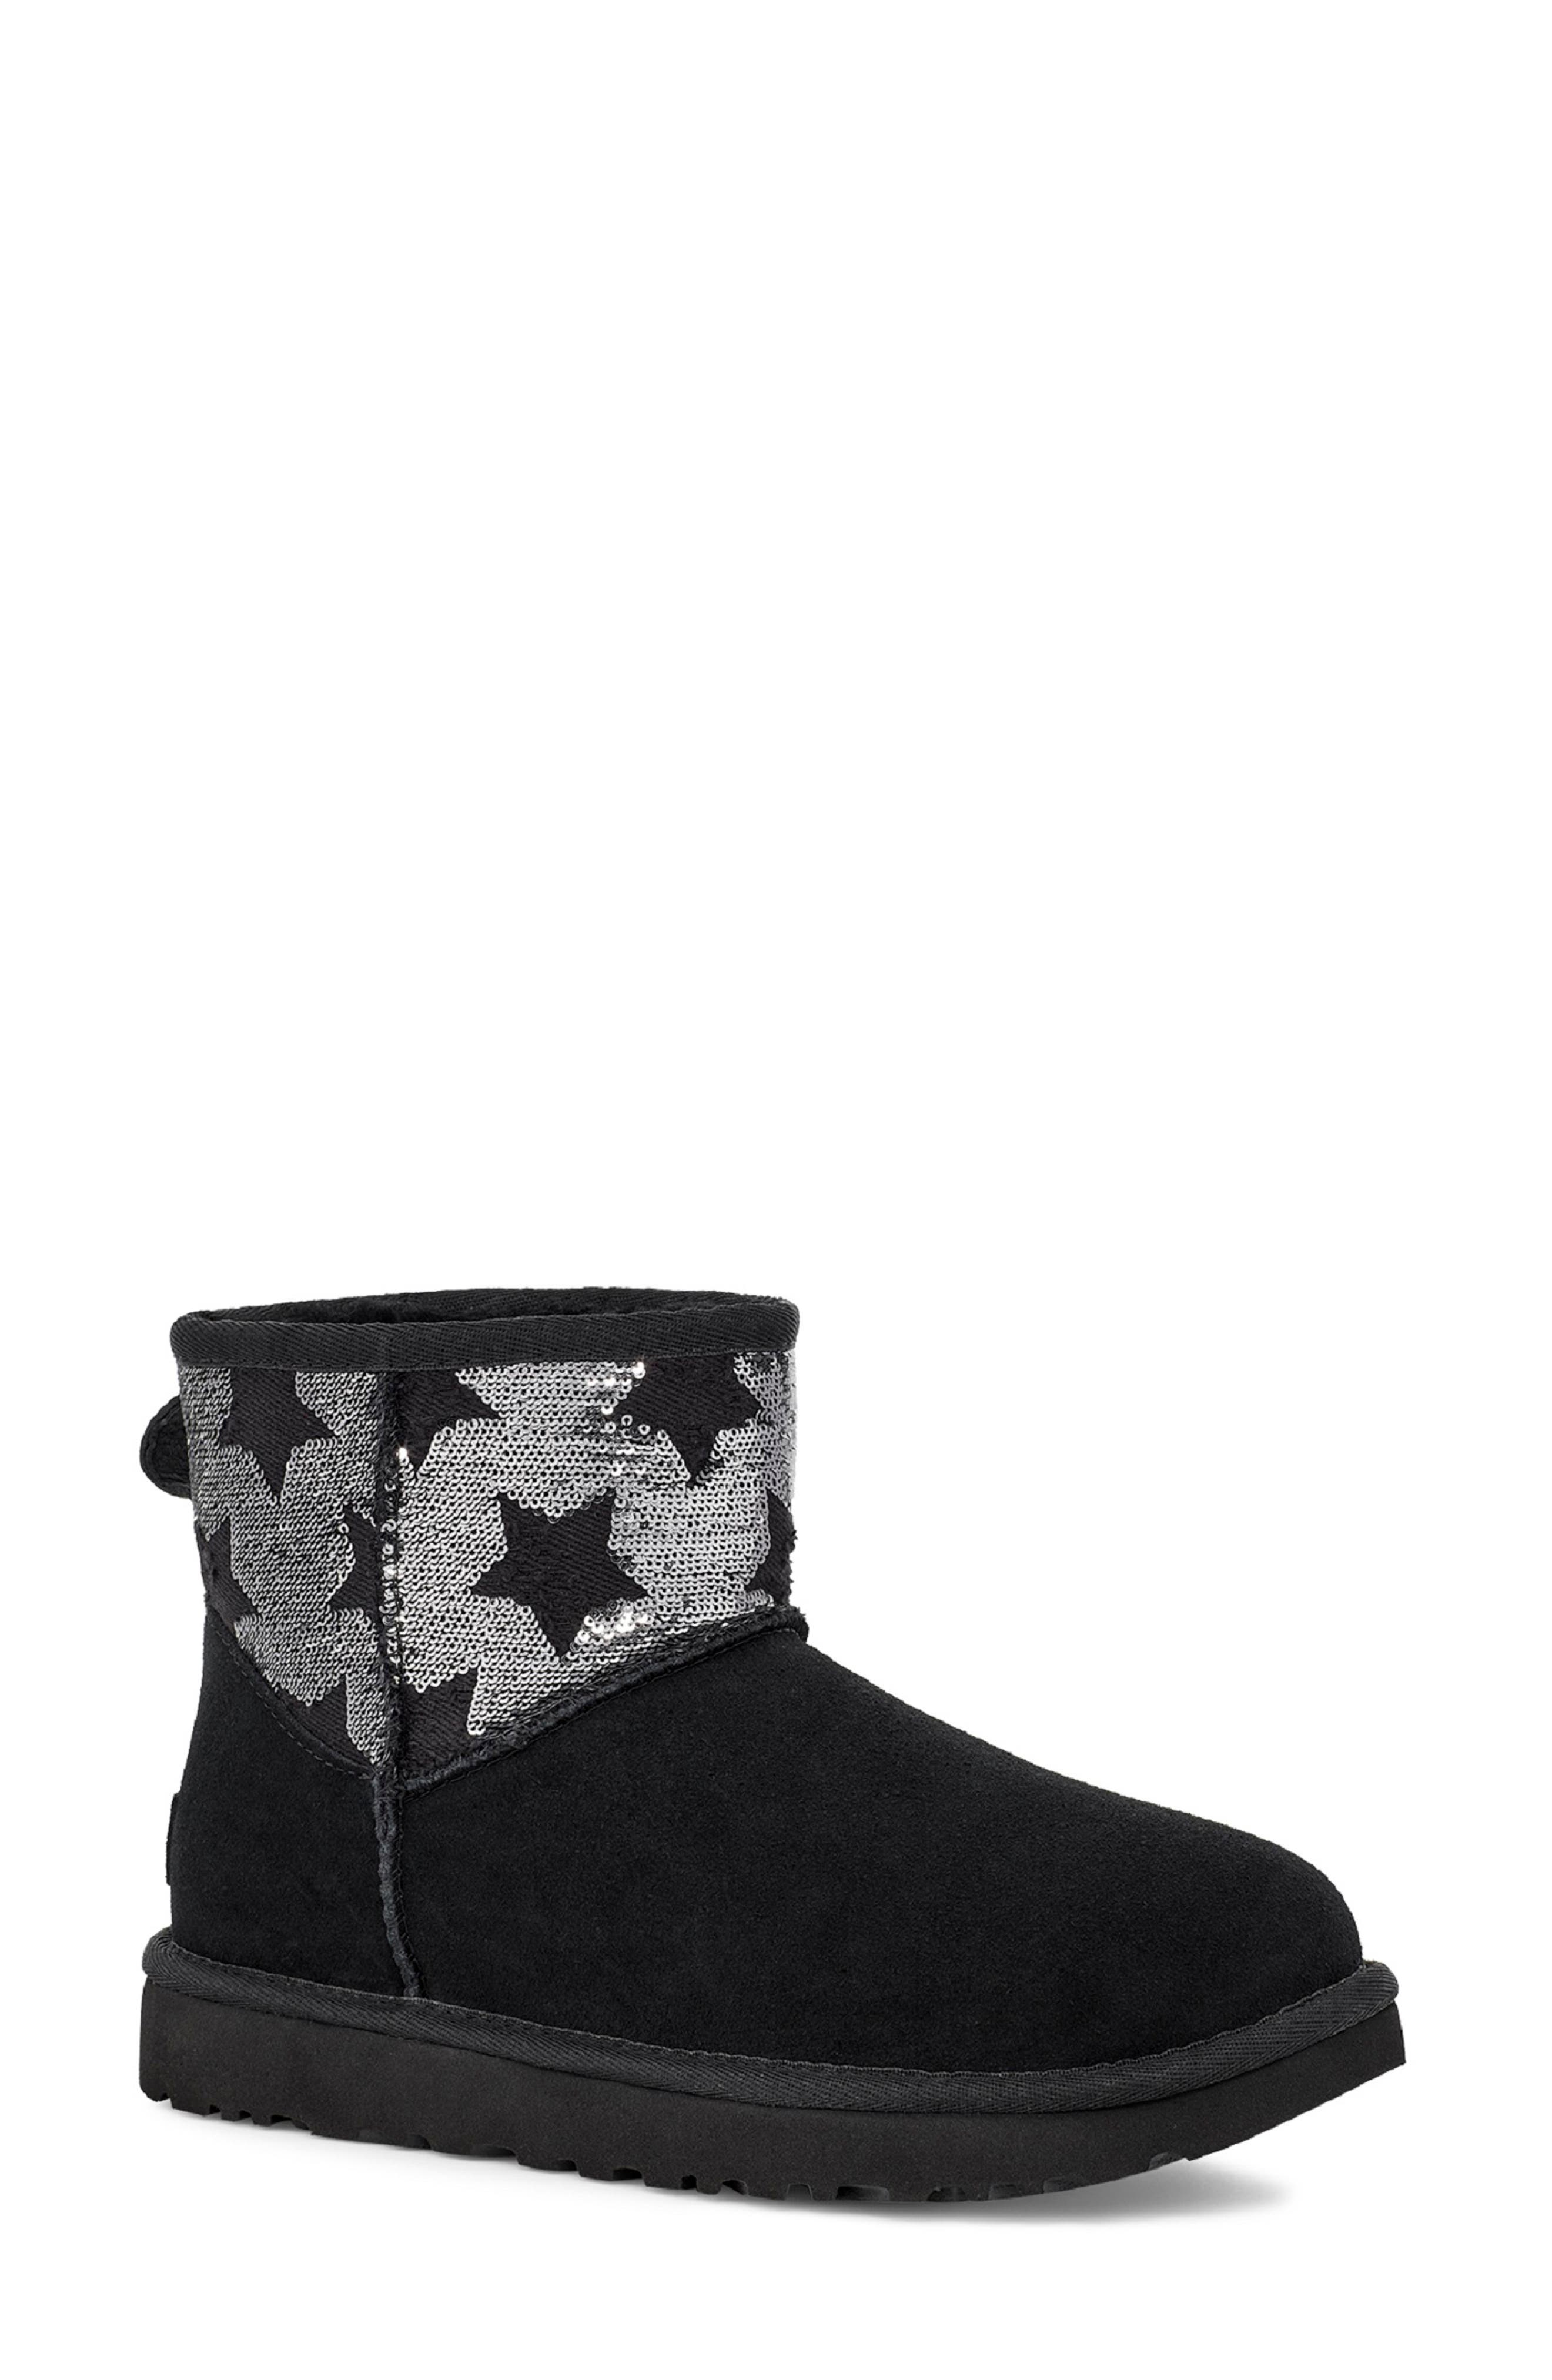 ugg boots with stars